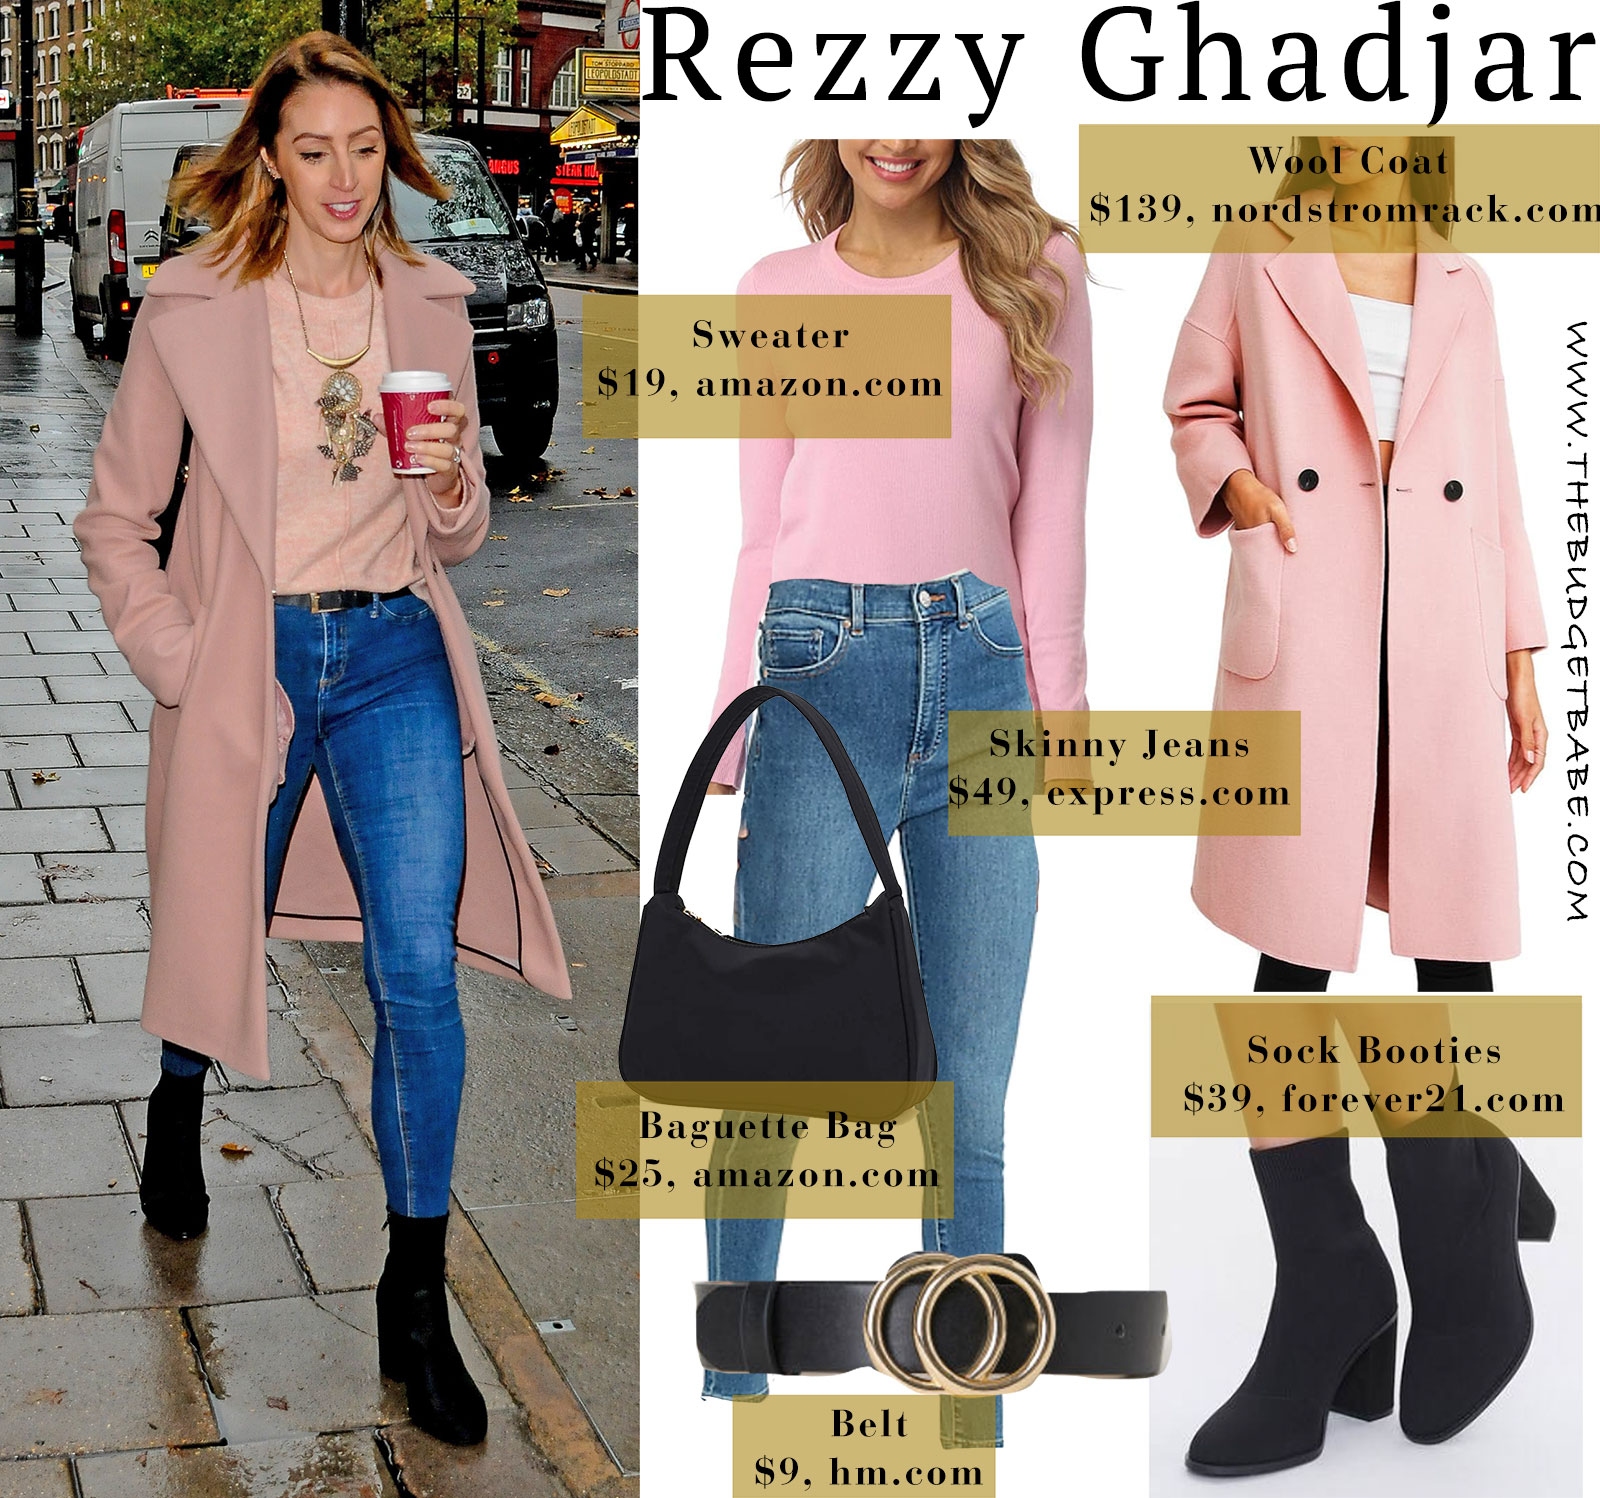 Rezzy Ghadjar pink coat and sweater with black accents look for less London style